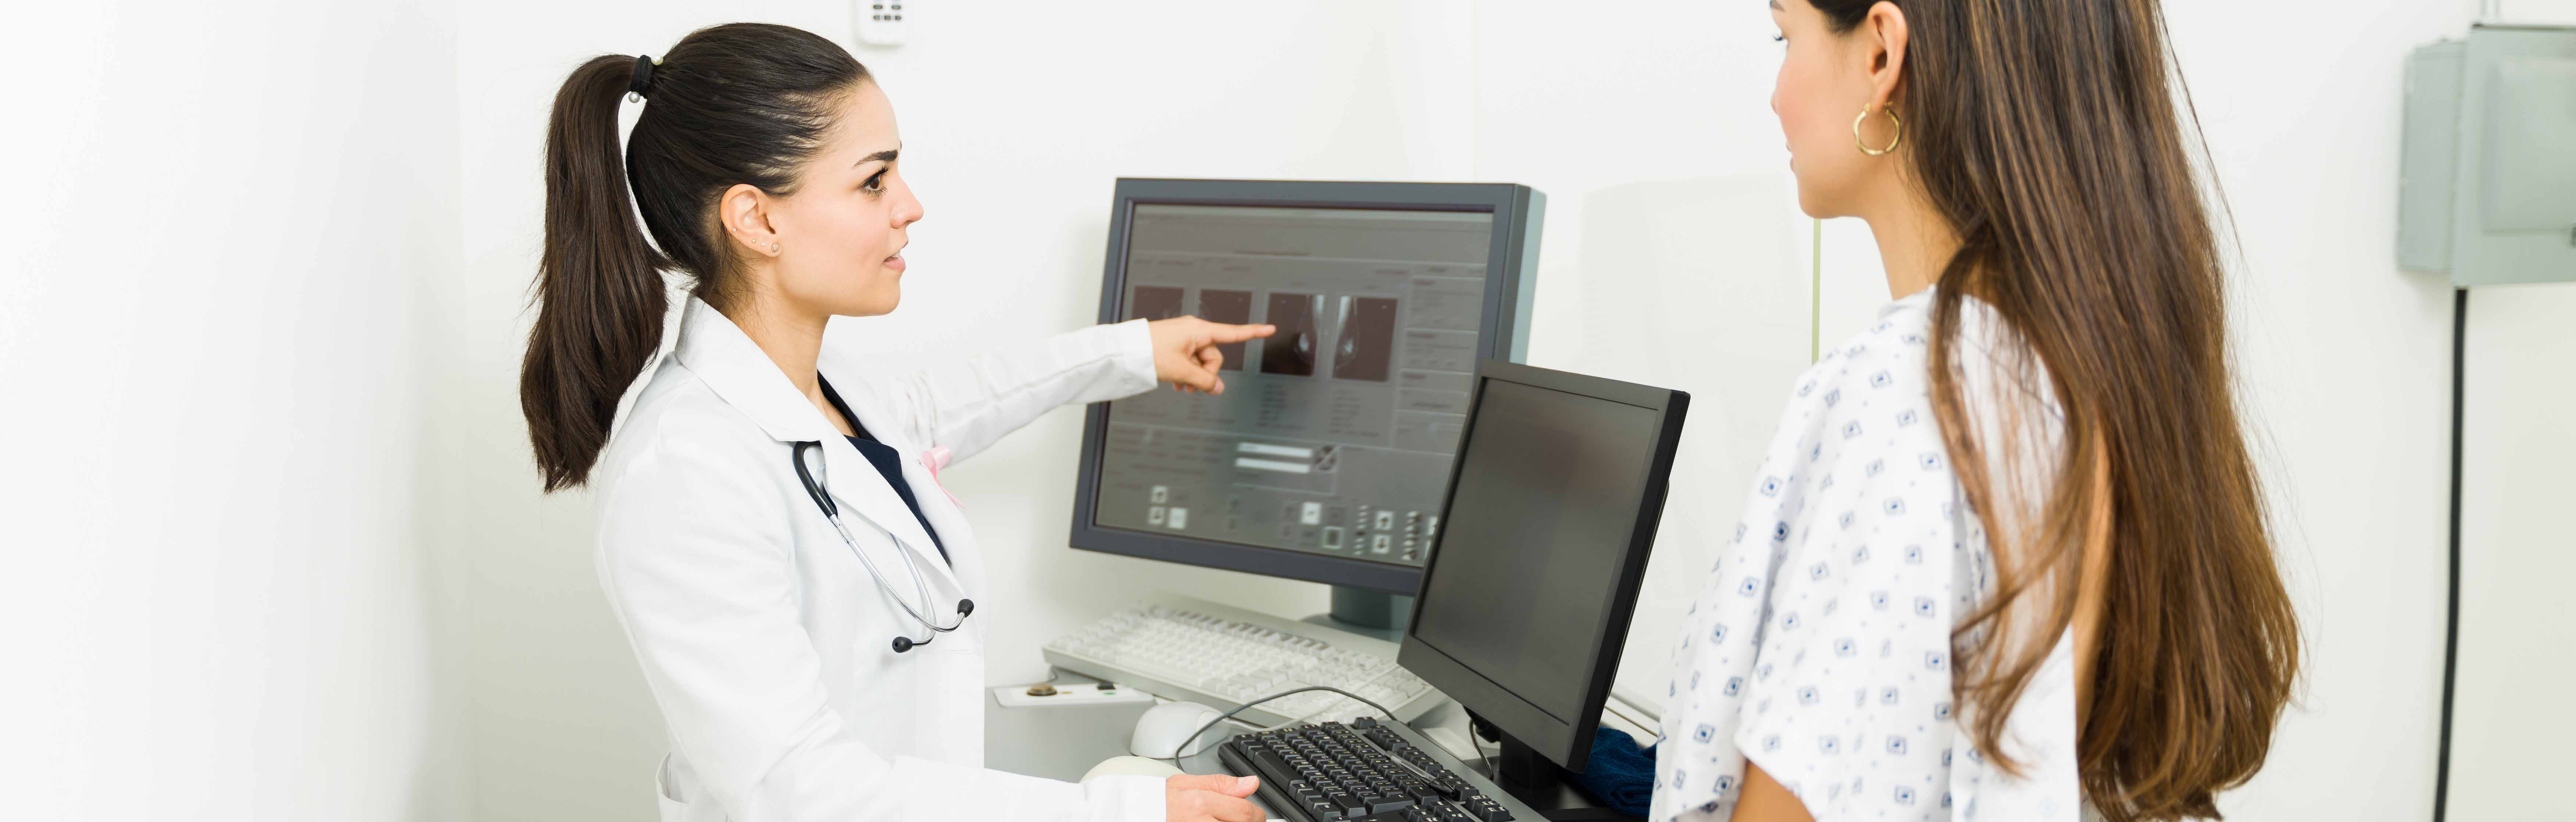 Physician showing patient the results of a mammogram.